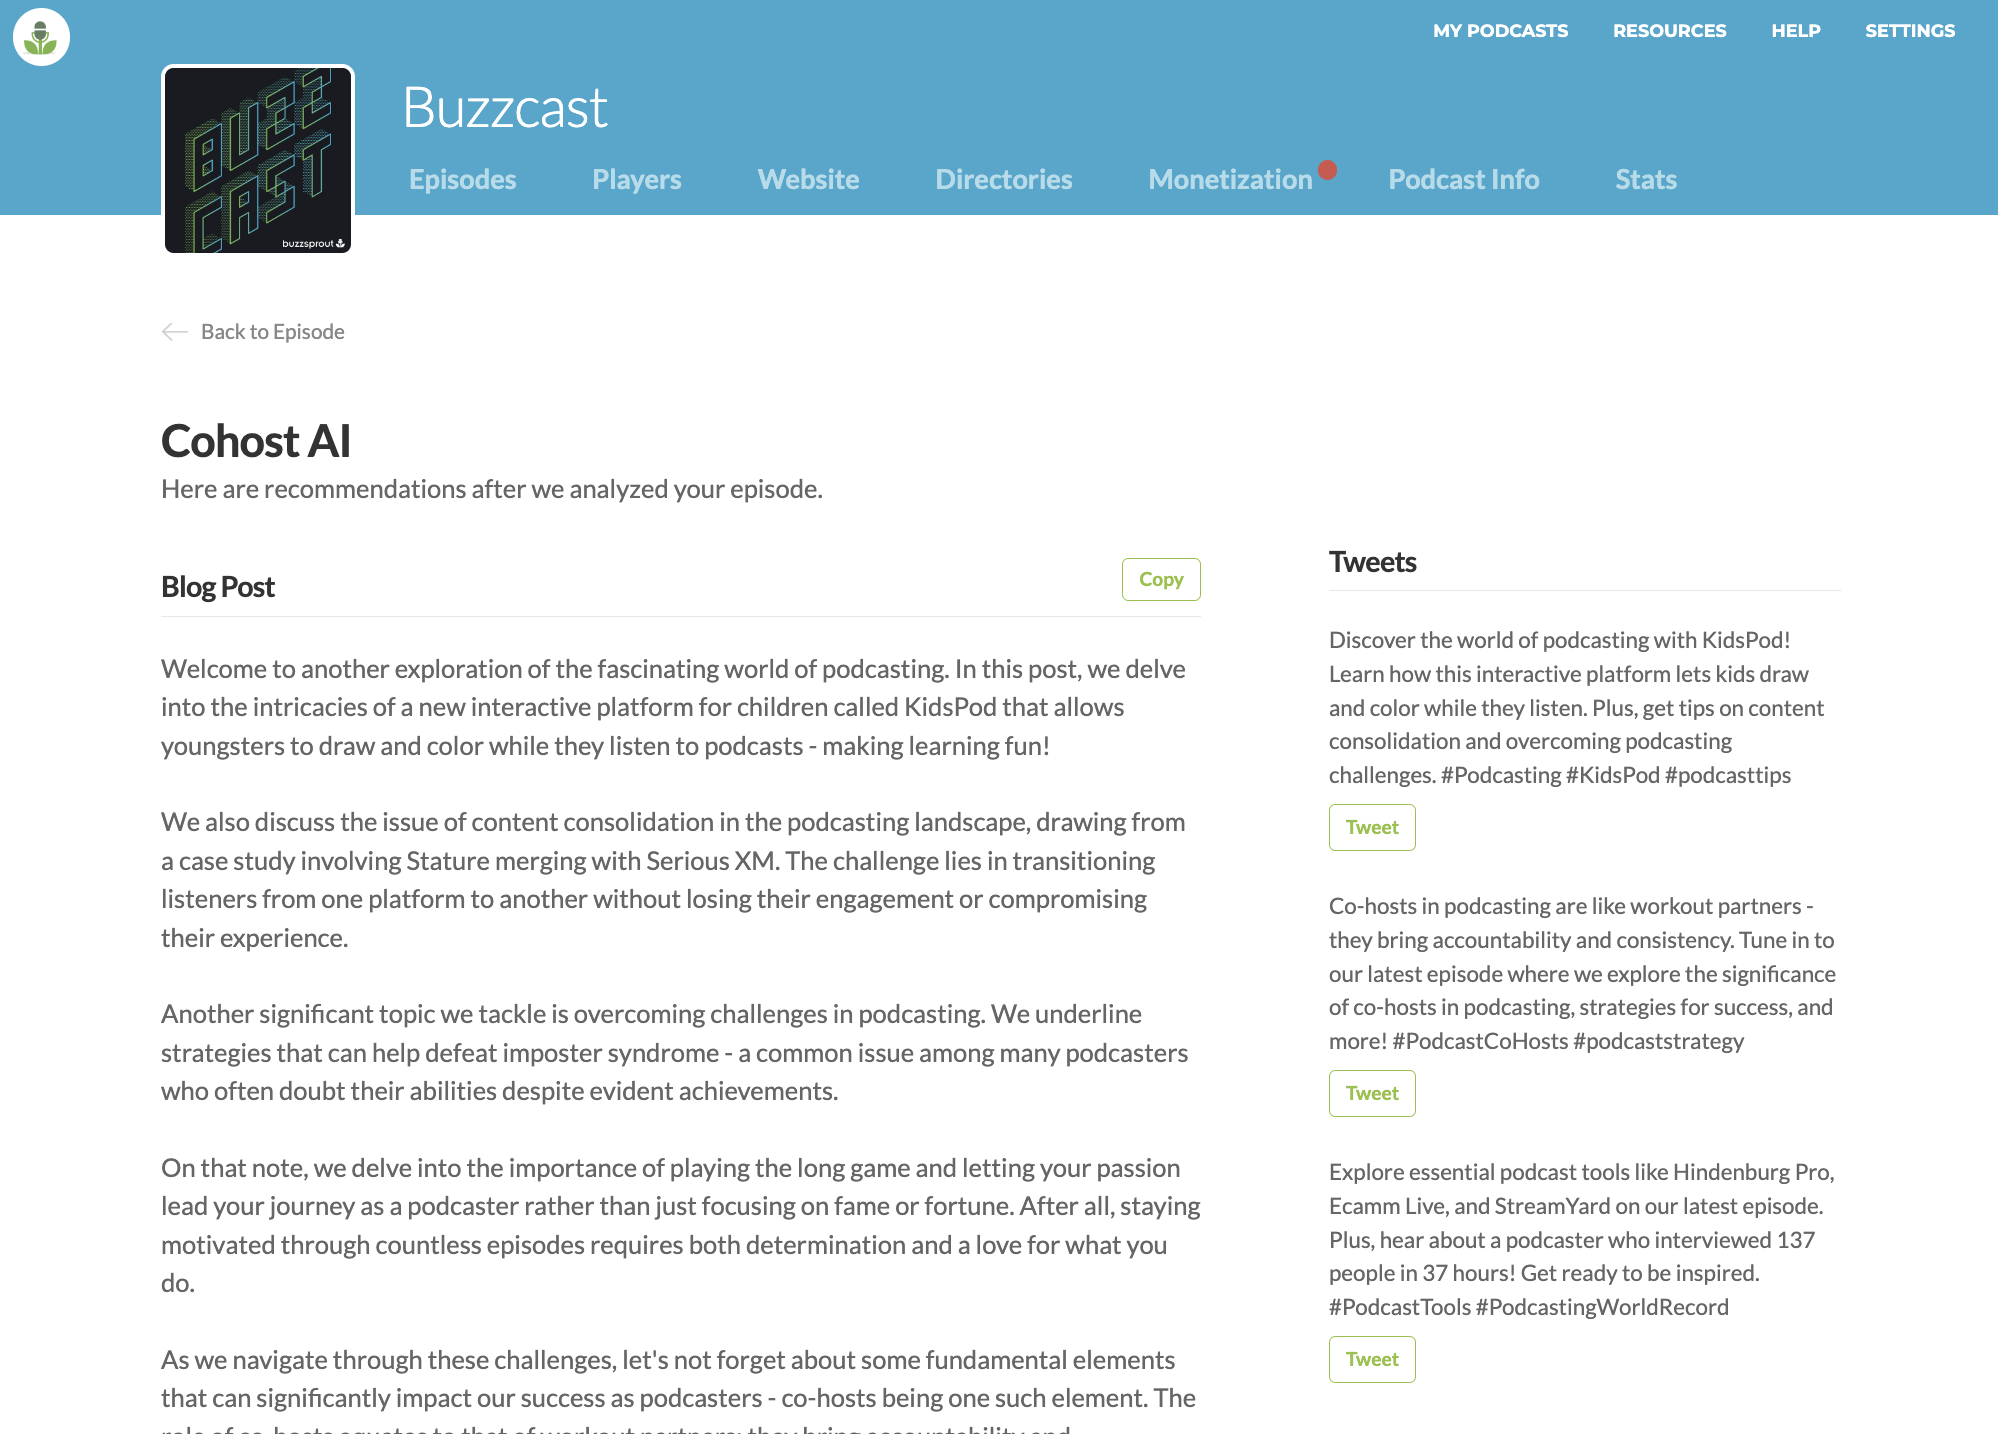 Cohost AI in Buzzsprout